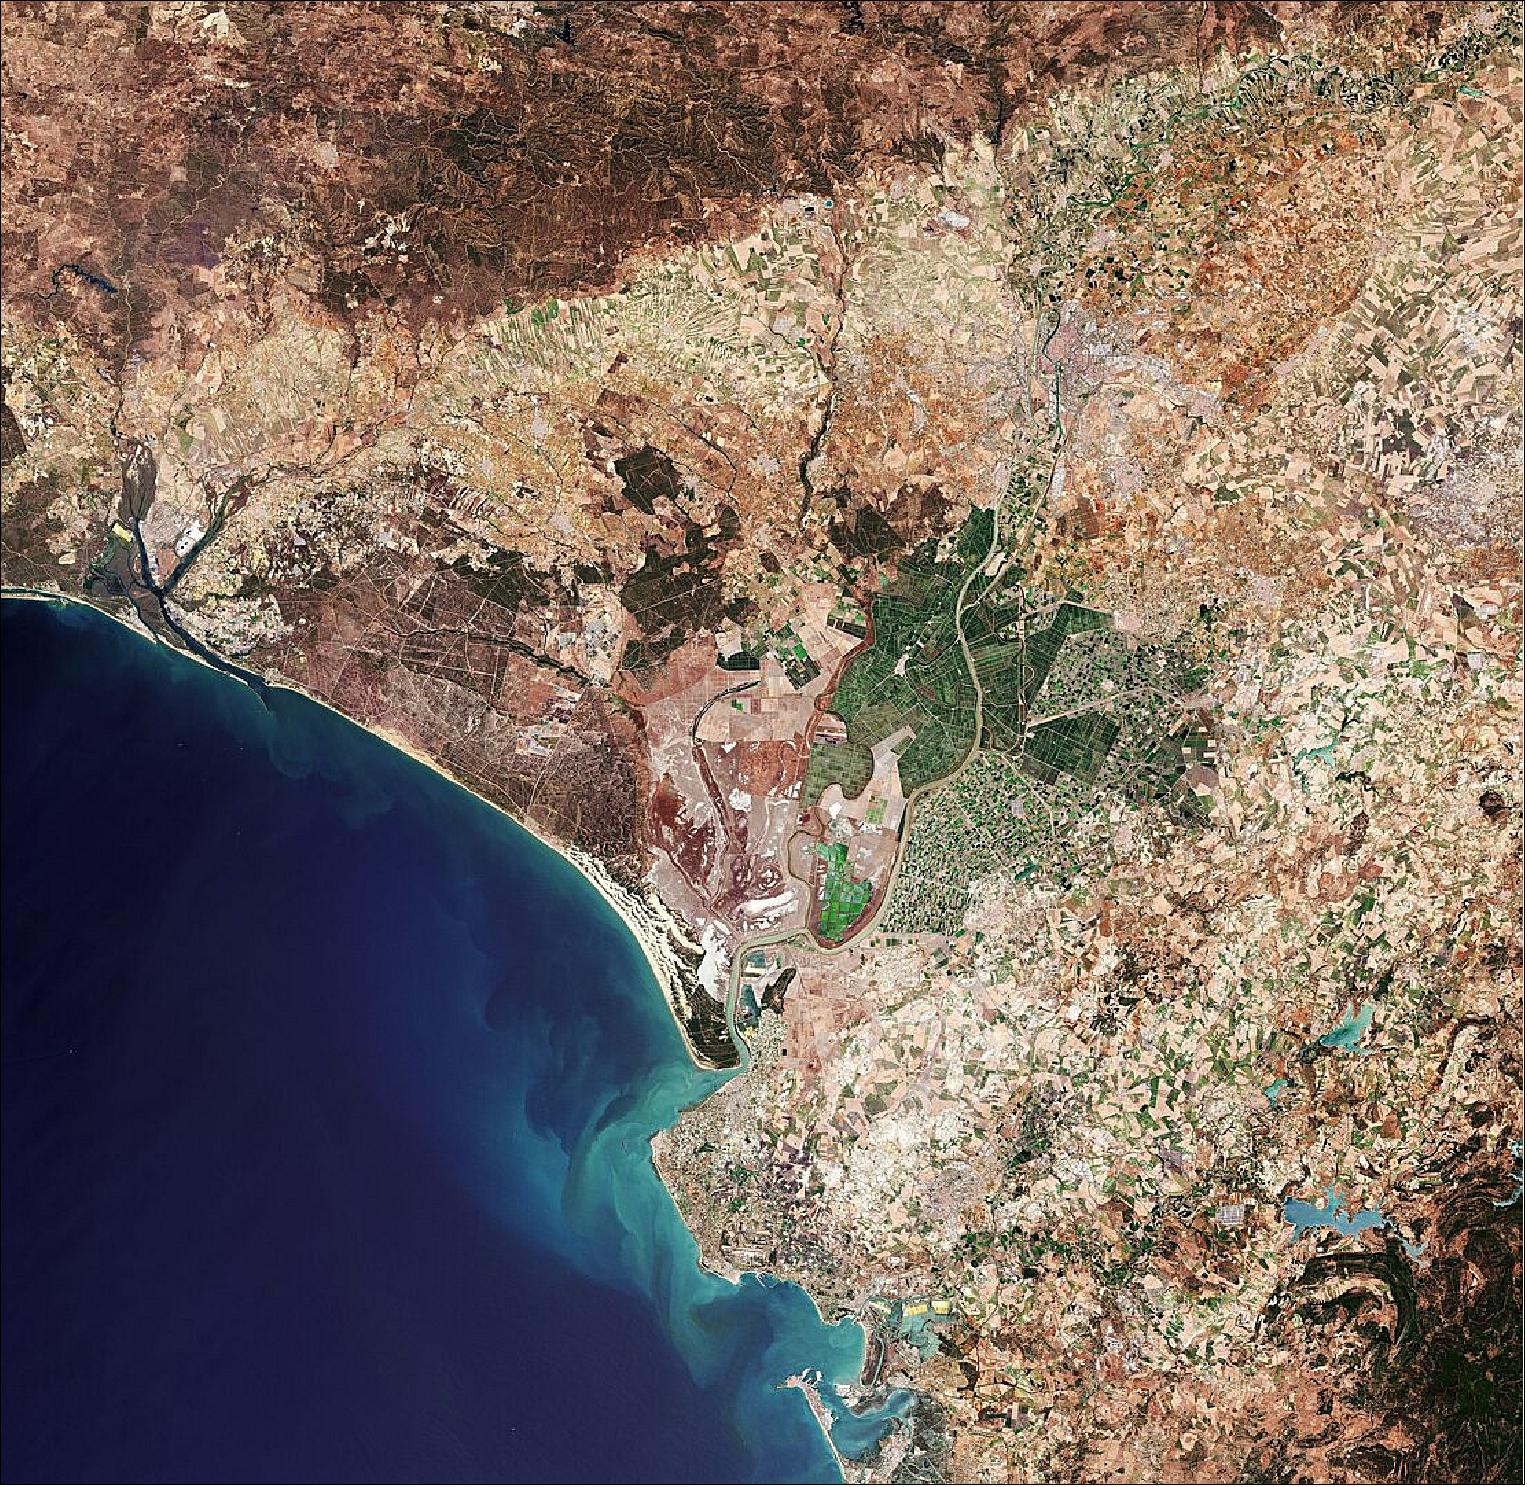 Figure 10: Seville, visible towards the top right of this image, is the capital of Andalusia and the fourth largest city in Spain. An inland port, it lies on the Guadalquivir River and while the original course of the river is visible snaking through the city on the right, we can see where water has also been redirected into a straighter course on the left. At over 650 km long, the Guadalquivir is one of the longest rivers in Spain, extending way beyond the frame of this image. Nevertheless, it can be seen winding its course all the way from the top right of the image, just south of the Sierra Norte mountain range, to the Gulf of Cádiz where it empties into the Atlantic Ocean. On route, this major river serves as a source for irrigation – here noticeable in the top right of the image, but mainly to the south of Seville where large green agricultural fields appear in sharp contrast to the surrounding drier brown land. This image, captured on 21 June 2019 with Sentinel-2, is also featured on the Earth from Space video program (image credit: ESA, the image contains modified Copernicus Sentinel data (2019), processed by ESA, CC BY-SA 3.0 IGO)